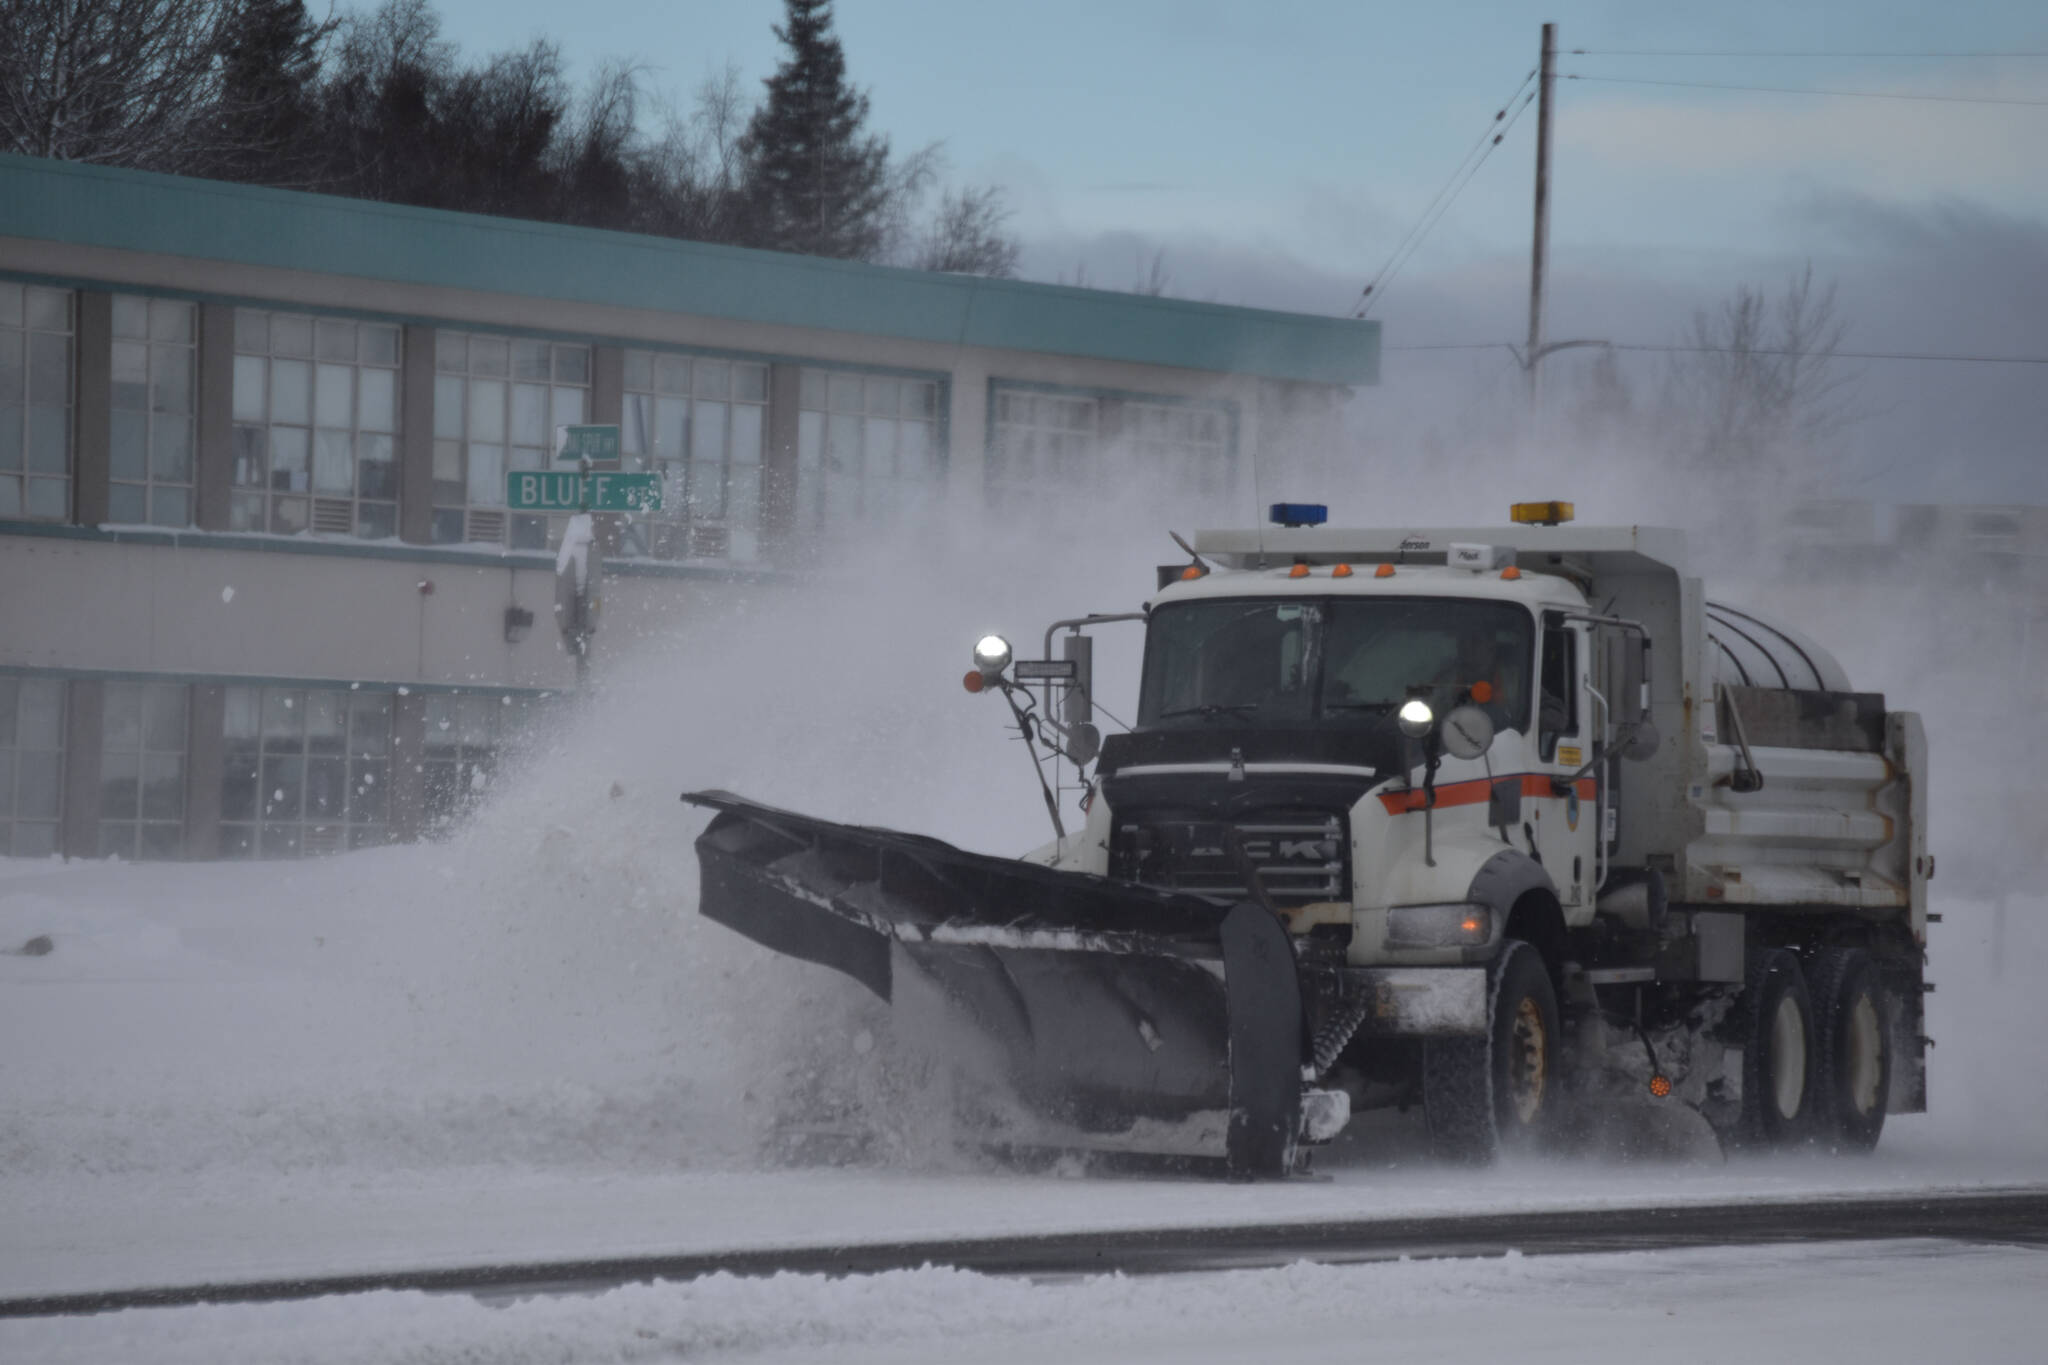 A plow truck clears snow as it moves down the Kenai Spur Highway in Kenai, Alaska on Wednesday, Oct. 26, 2022. (Jake Dye/Peninsula Clarion)